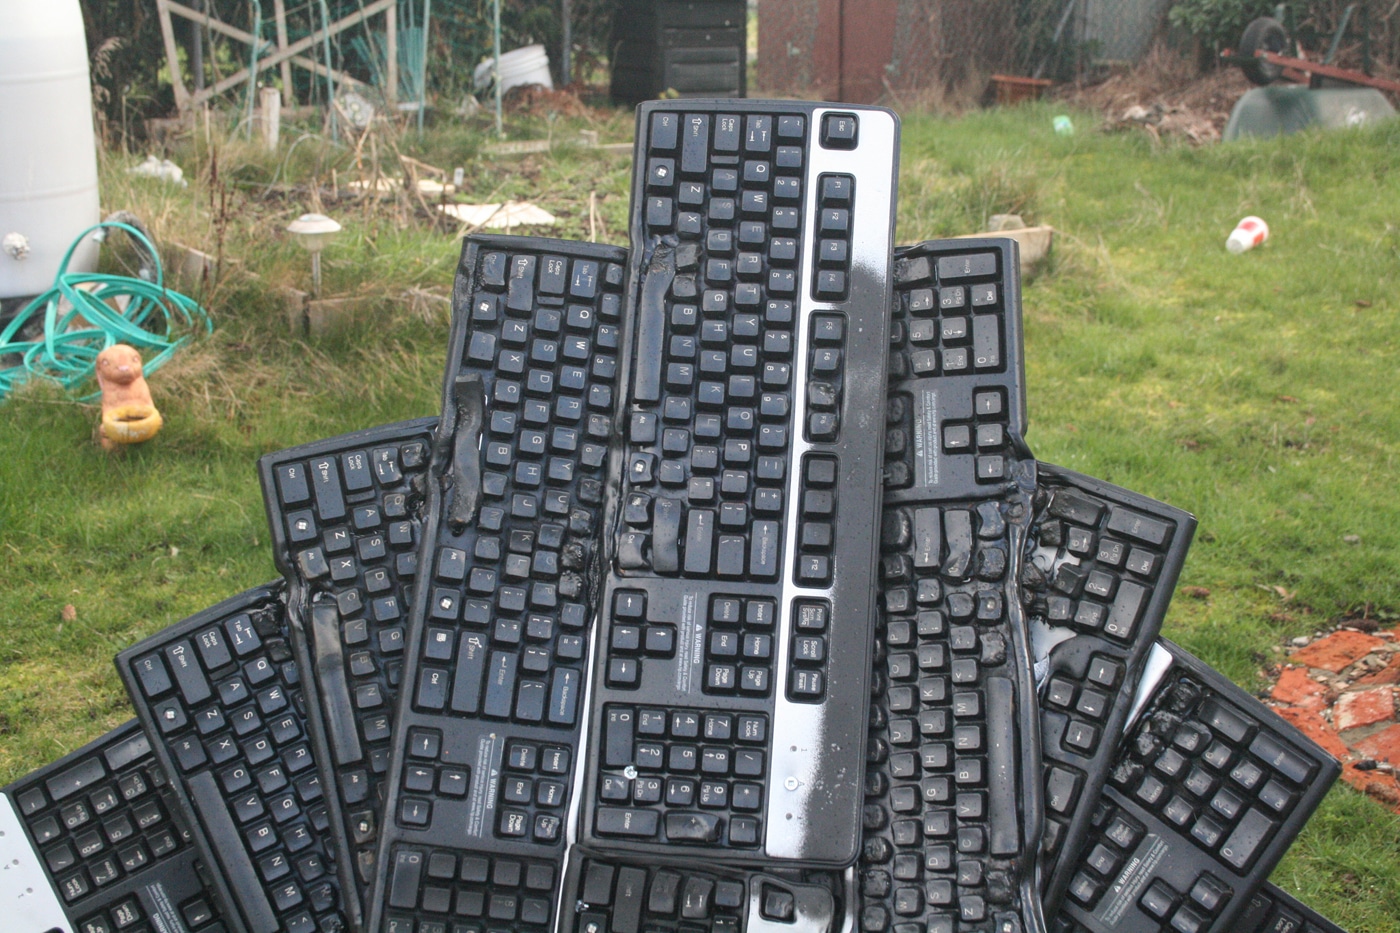 game-of-thrones-computer-keyboards